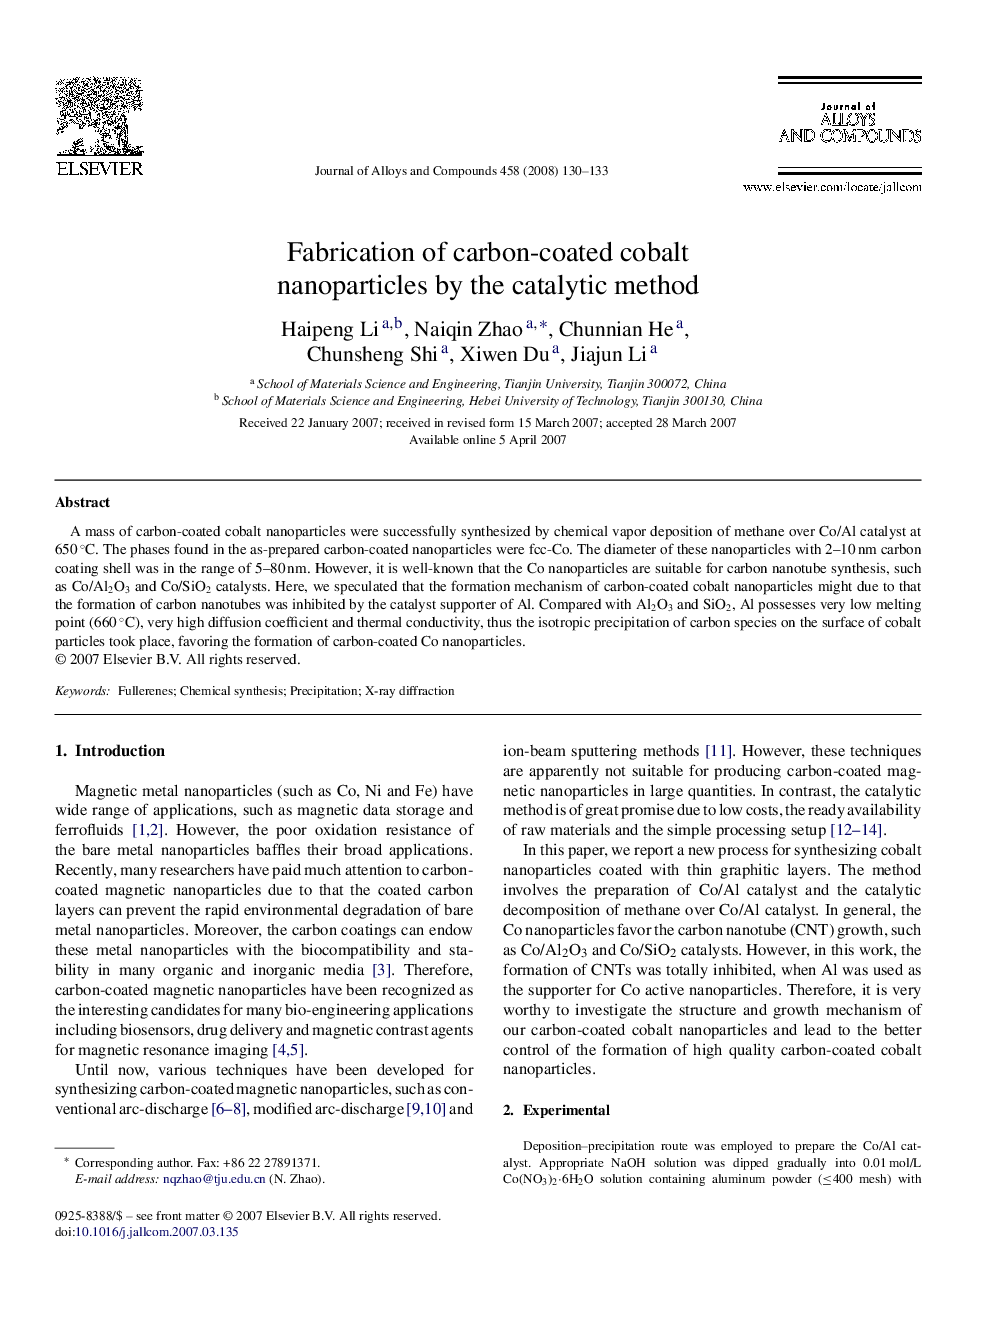 Fabrication of carbon-coated cobalt nanoparticles by the catalytic method